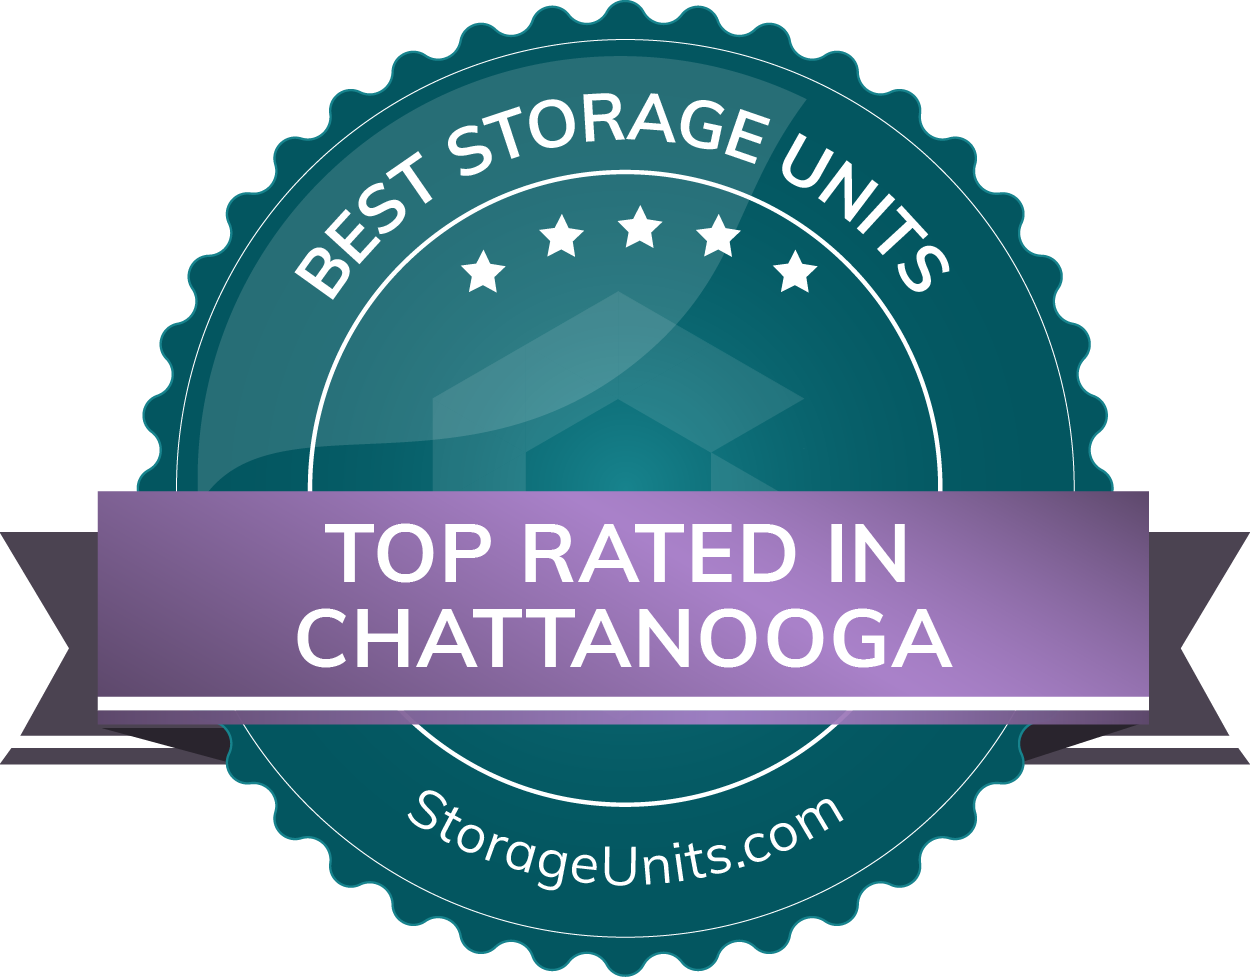 Best storage units top rated in Chattanooga.